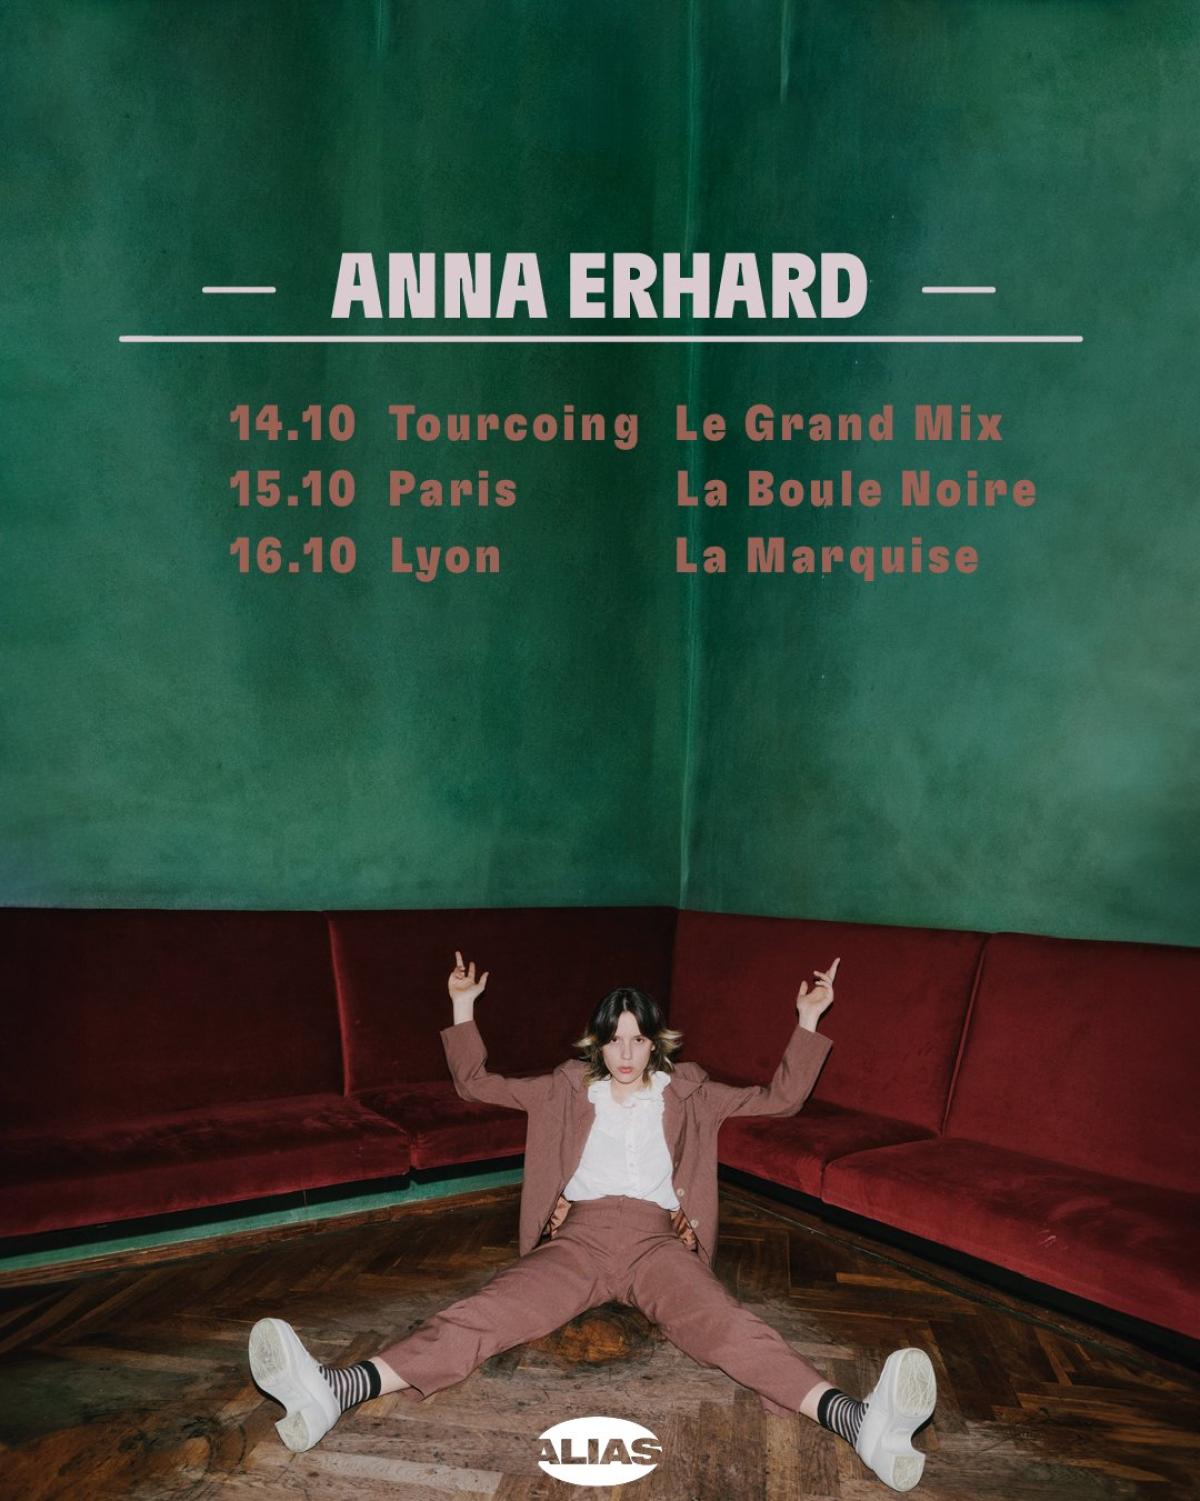 Billets Anna Erhard (Le Grand Mix - Tourcoing)